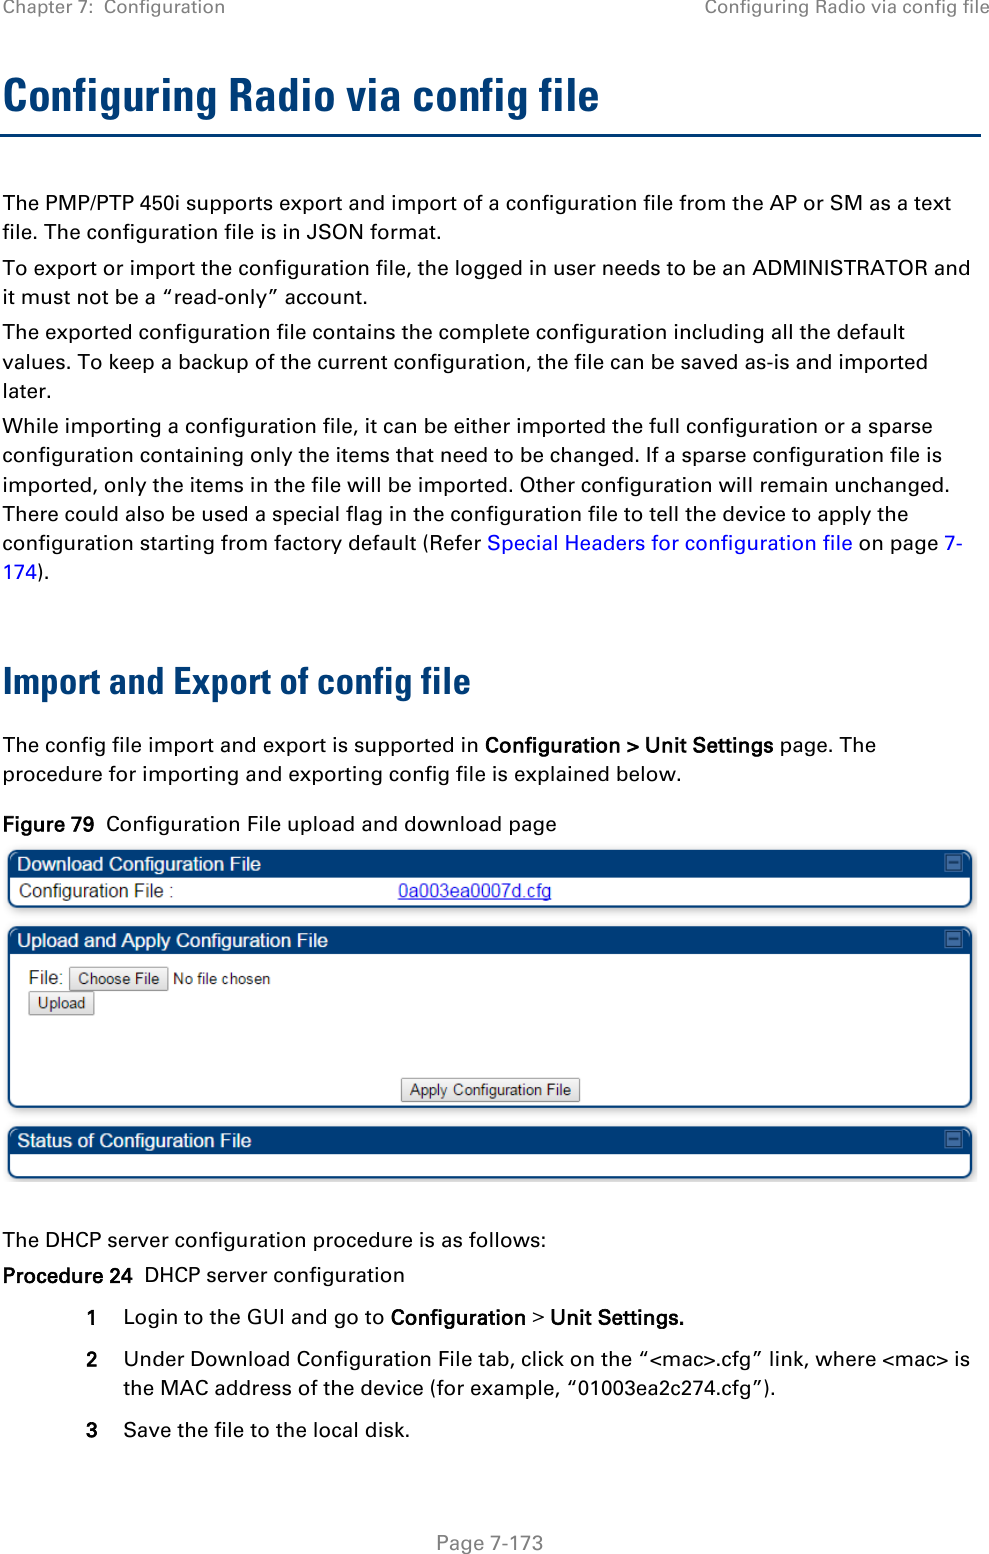 Chapter 7:  Configuration Configuring Radio via config file   Page 7-173 Configuring Radio via config file The PMP/PTP 450i supports export and import of a configuration file from the AP or SM as a text file. The configuration file is in JSON format.  To export or import the configuration file, the logged in user needs to be an ADMINISTRATOR and it must not be a “read-only” account.  The exported configuration file contains the complete configuration including all the default values. To keep a backup of the current configuration, the file can be saved as-is and imported later. While importing a configuration file, it can be either imported the full configuration or a sparse configuration containing only the items that need to be changed. If a sparse configuration file is imported, only the items in the file will be imported. Other configuration will remain unchanged. There could also be used a special flag in the configuration file to tell the device to apply the configuration starting from factory default (Refer Special Headers for configuration file on page 7-174).  Import and Export of config file The config file import and export is supported in Configuration &gt; Unit Settings page. The procedure for importing and exporting config file is explained below. Figure 79  Configuration File upload and download page   The DHCP server configuration procedure is as follows: Procedure 24  DHCP server configuration 1 Login to the GUI and go to Configuration &gt; Unit Settings.  2 Under Download Configuration File tab, click on the “&lt;mac&gt;.cfg” link, where &lt;mac&gt; is the MAC address of the device (for example, “01003ea2c274.cfg”). 3 Save the file to the local disk. 